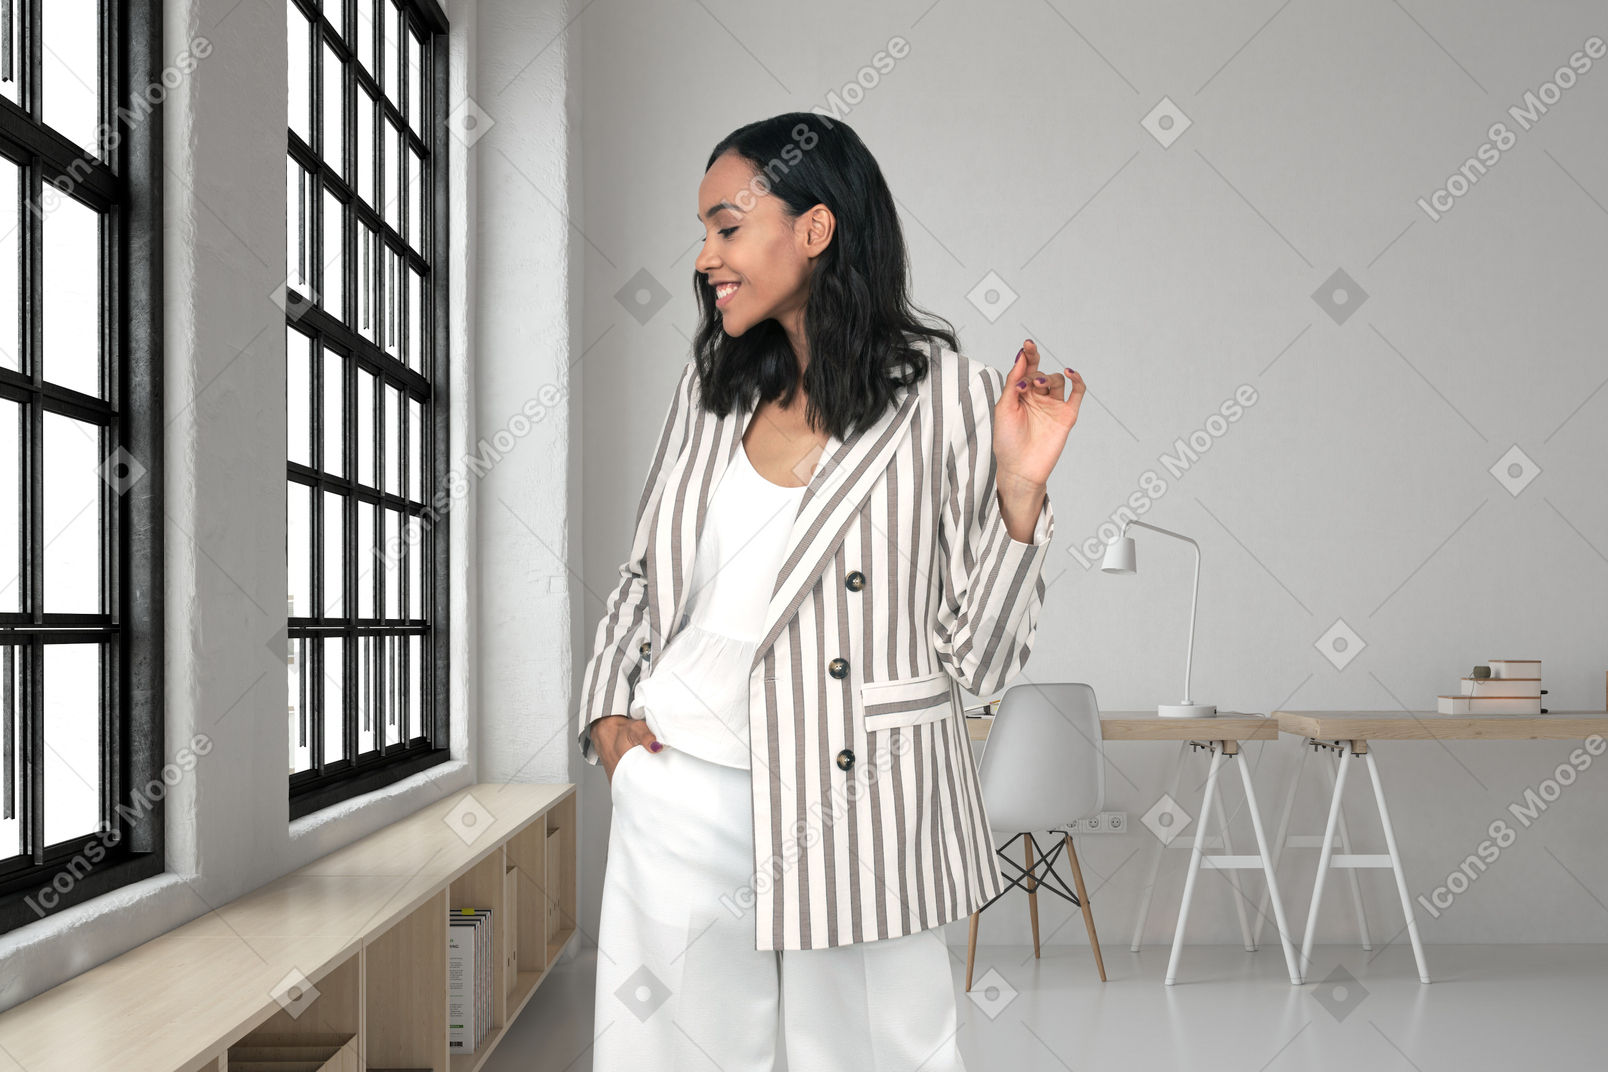 A woman standing in front of a window in a room